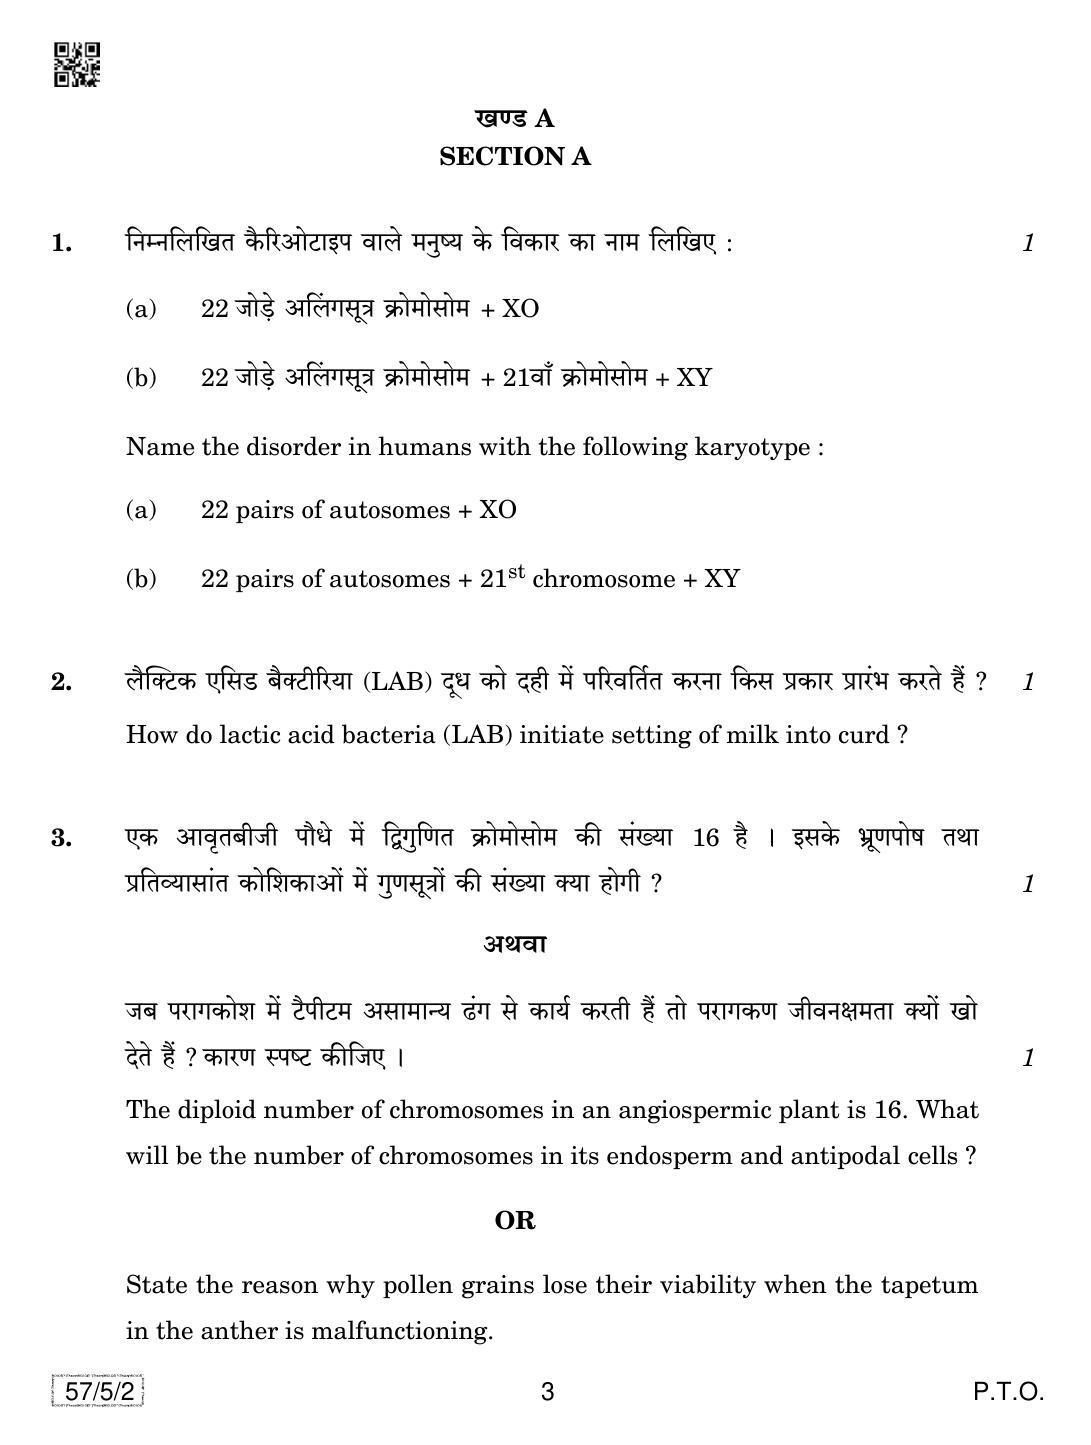 CBSE Class 12 57-5-2 Biology 2019 Question Paper - Page 3